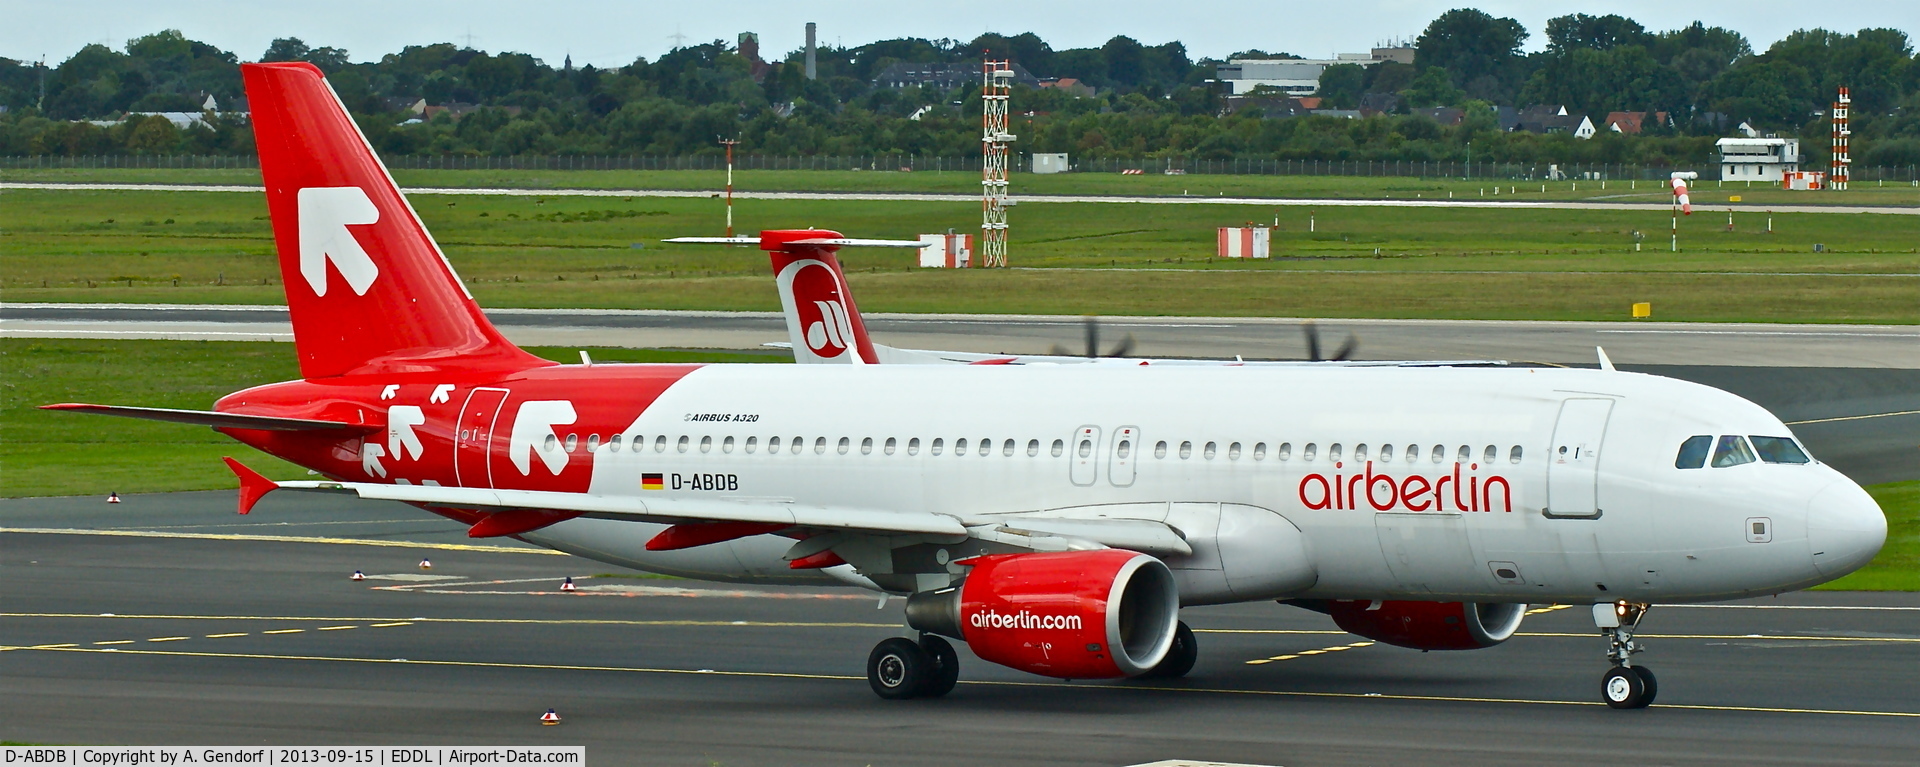 D-ABDB, 2005 Airbus A320-214 C/N 2619, Air Berlin (OLT-Express cs.), seen here on the taxiway 